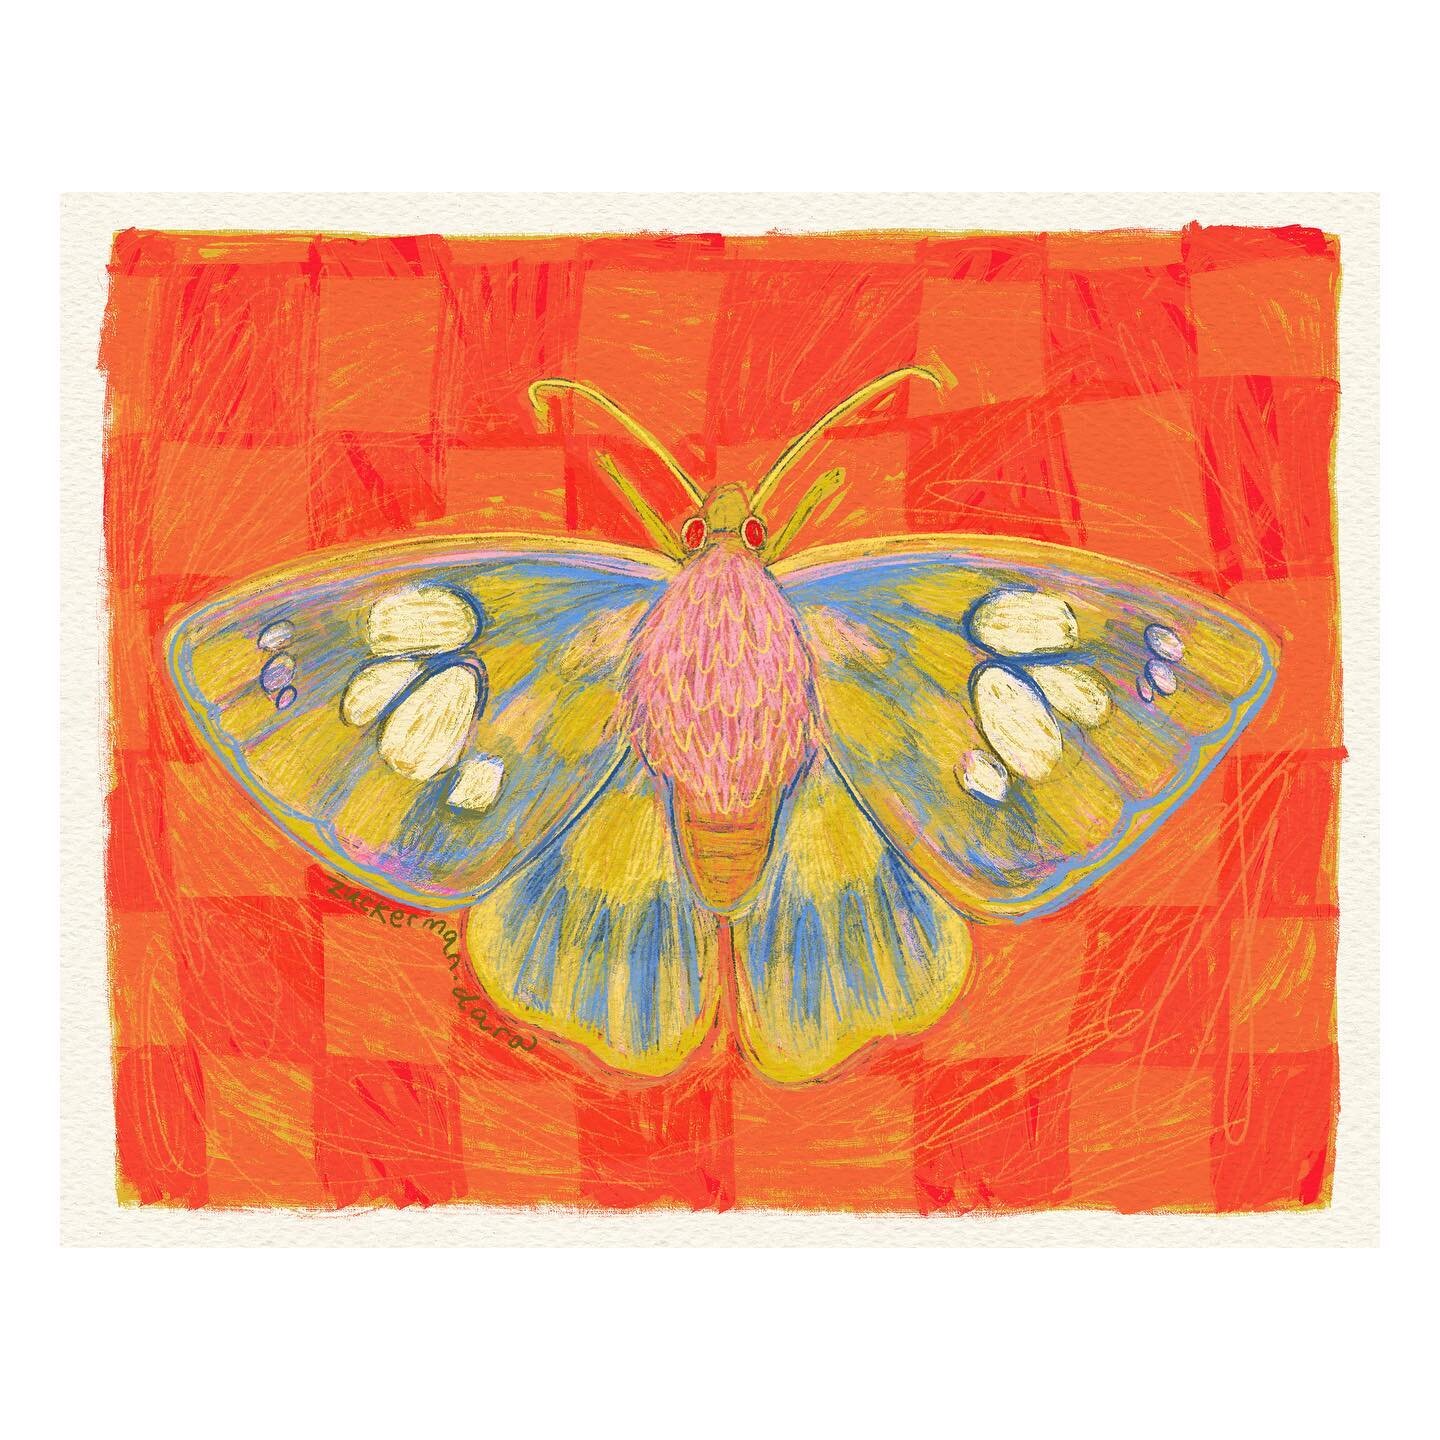 A moth illustration for this snowy Wednesday!! 🐞🐛🐜🪲🕷️🦋🐝🦗
.
.
.
.
#moth #insectsofinstagram #insects #bugart #checkerboard #checkered #patterndesign #orange #sketchbook #mixedmedia #surrealism  #acrylicpaint #smallbusiness  #coloredpencil #ill